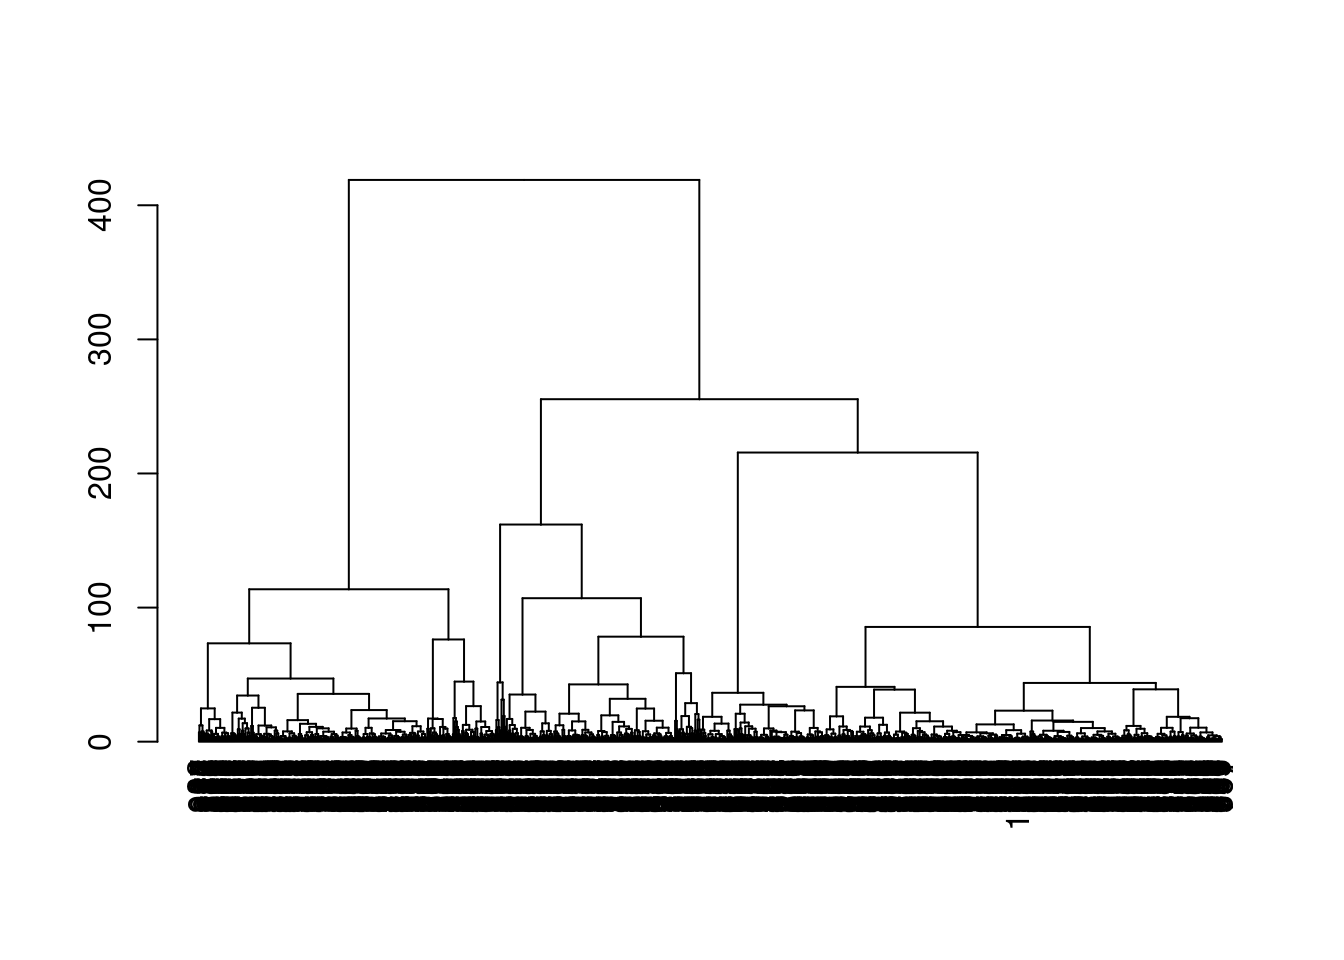 Dendrogram of the $k$-mean centroids after hierarchical clustering in the PBMC dataset. Each leaf node represents a representative cluster of cells generated by $k$-mean clustering.